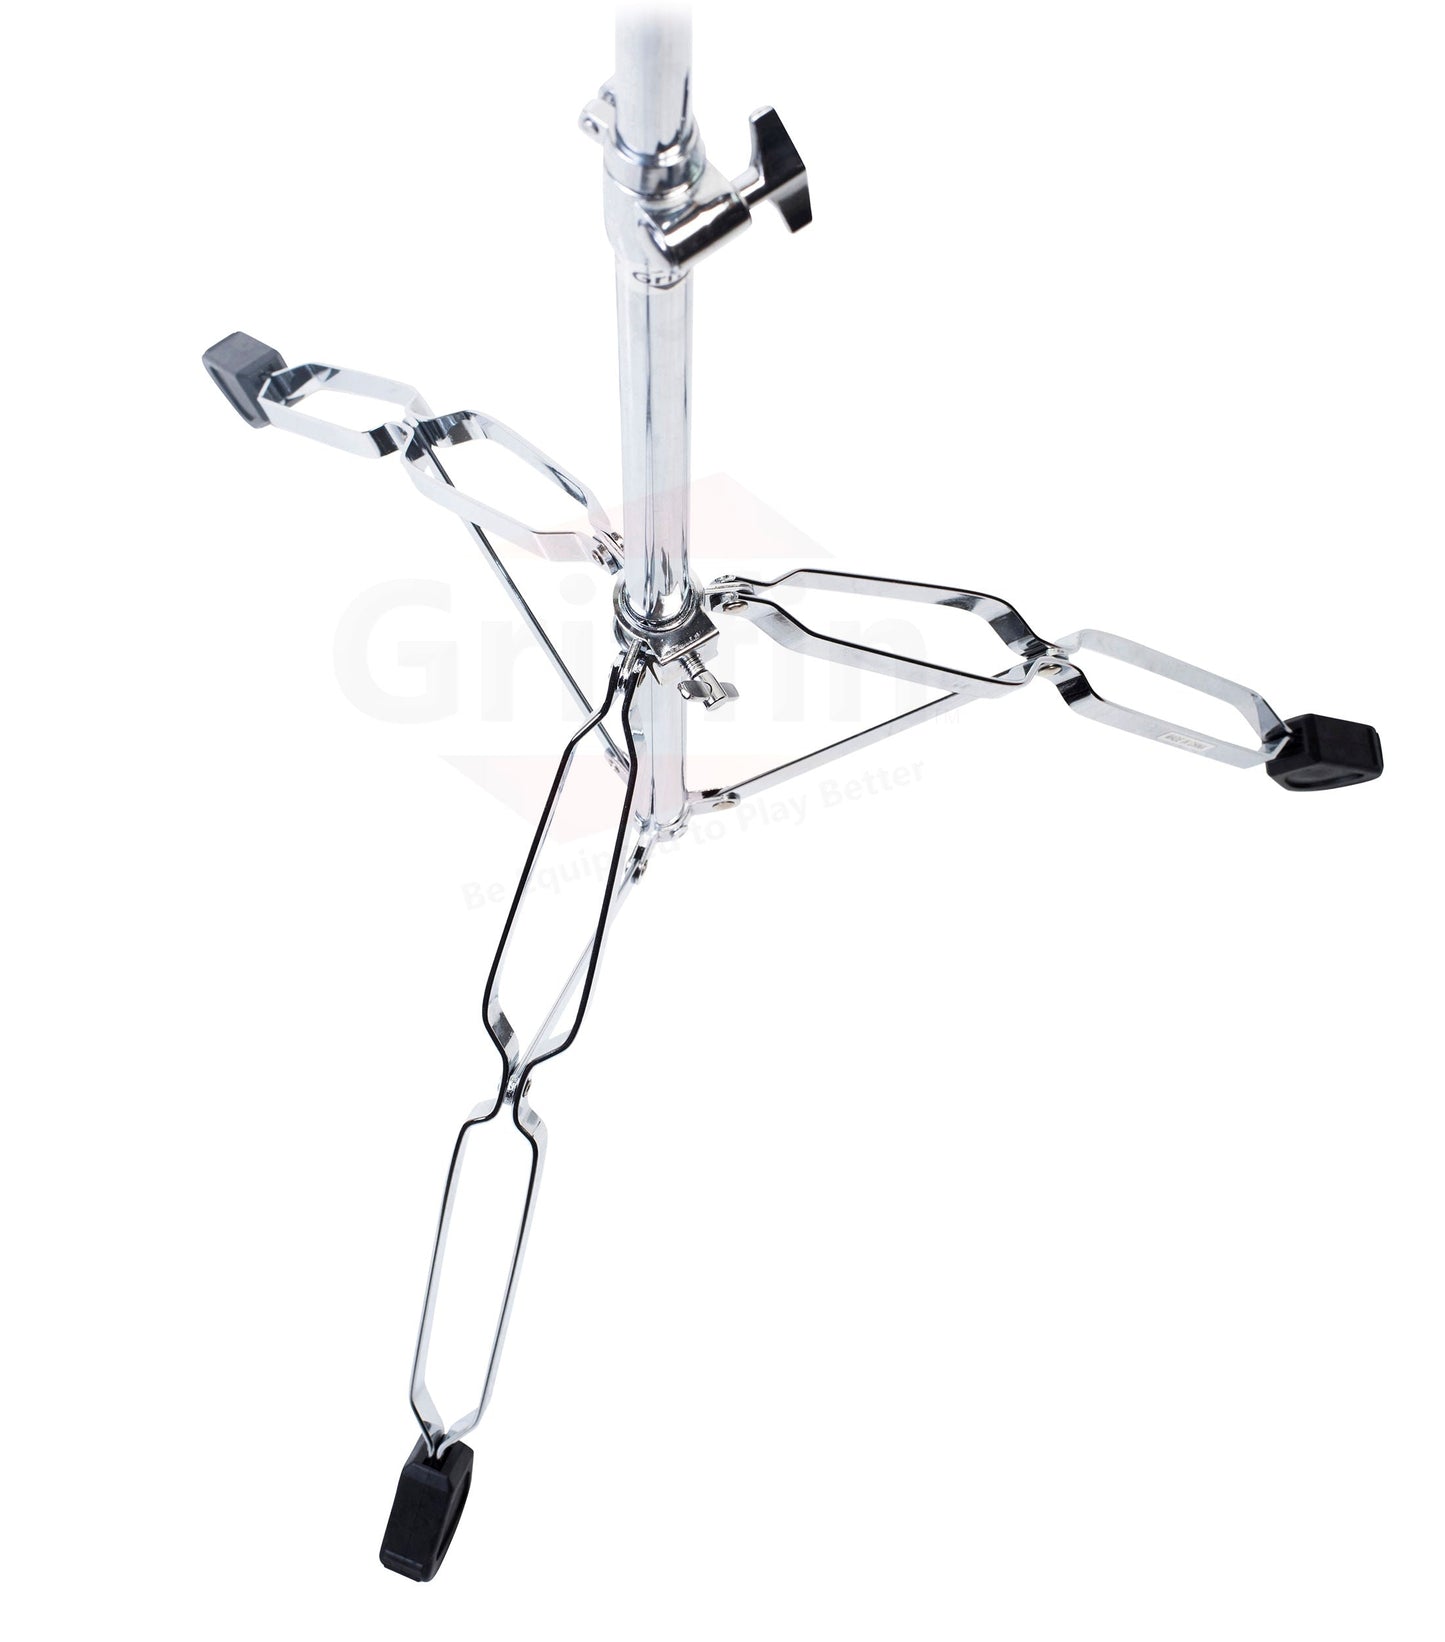 Straight Cymbal Stand by GRIFFIN - Deluxe Percussion Drum Hardware Set for Mounting Cymbals